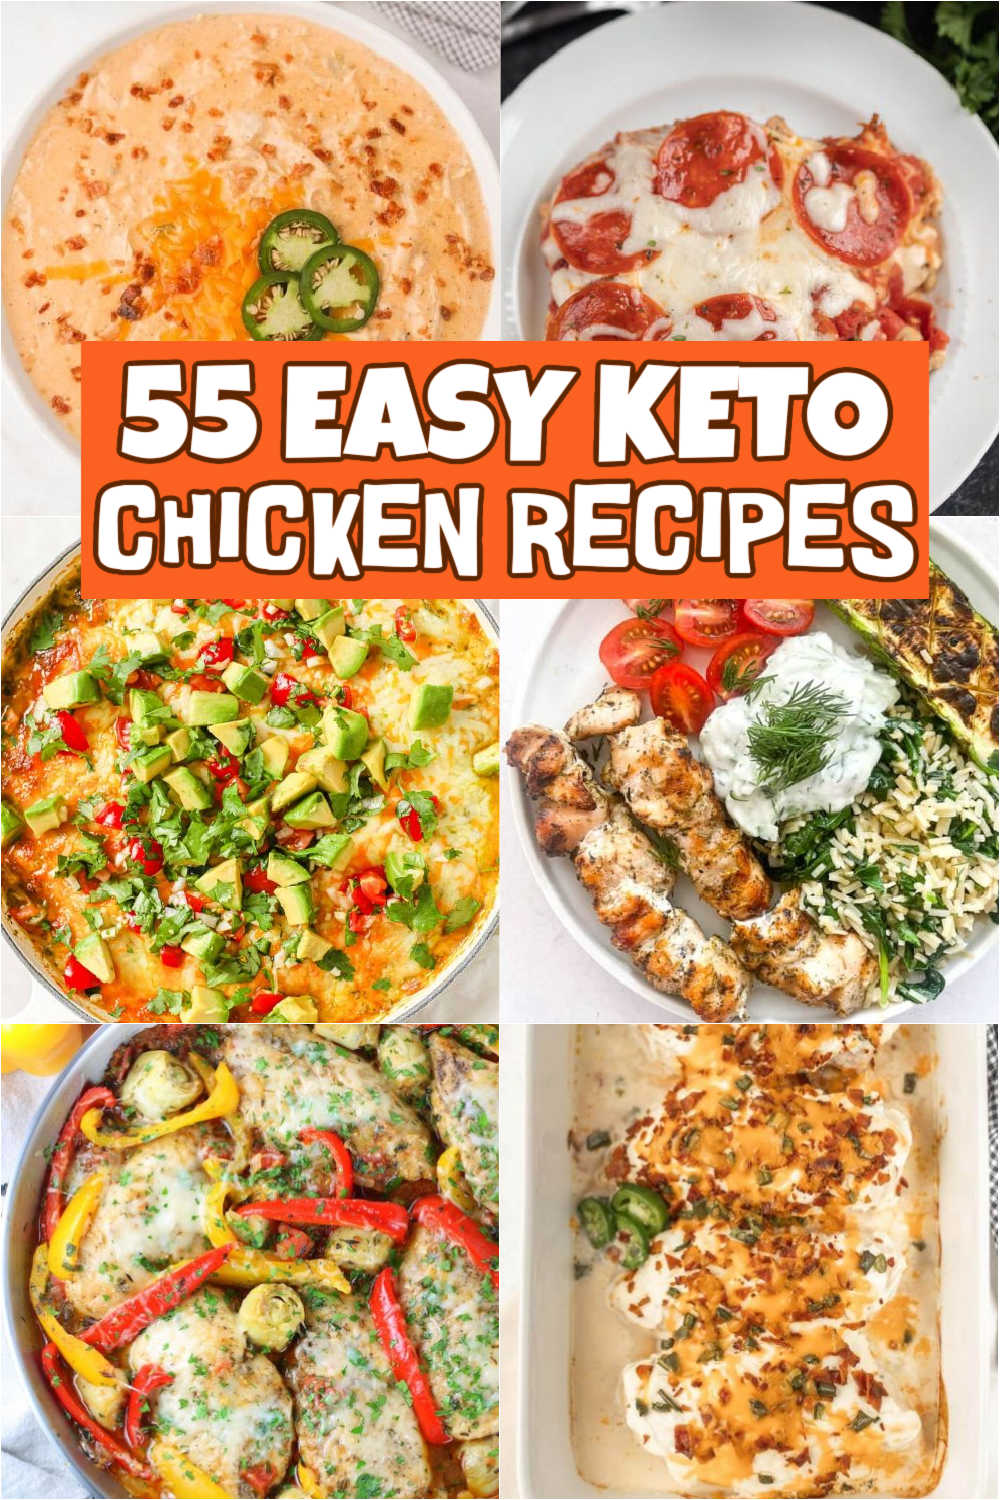 Add these keto chicken recipes to your baking list. We’ve rounded up the 55 best keto chicken recipes to enjoy with your family. Here are the chicken keto recipes that are perfect for serving any time of the day. These are savory meals whether you’re looking for the perfect keto for lunch or dinner! #eatingonadime #ketochickenrecipes #ketorecipes